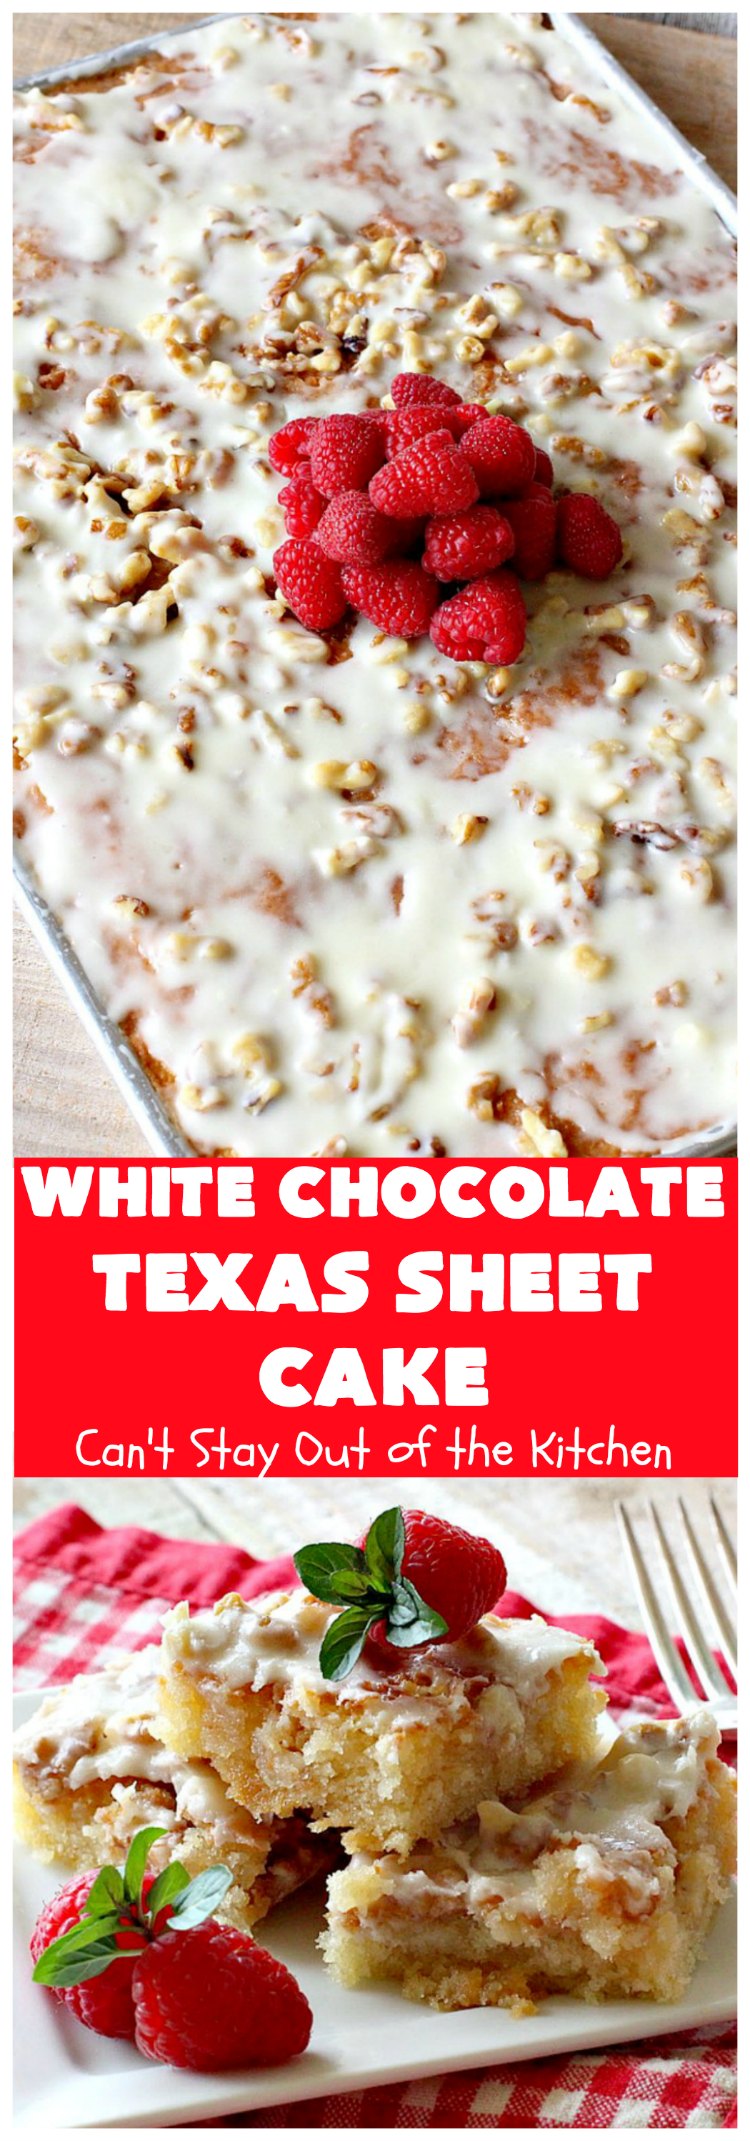 White Chocolate Texas Sheet Cake | Can't Stay Out of the Kitchen